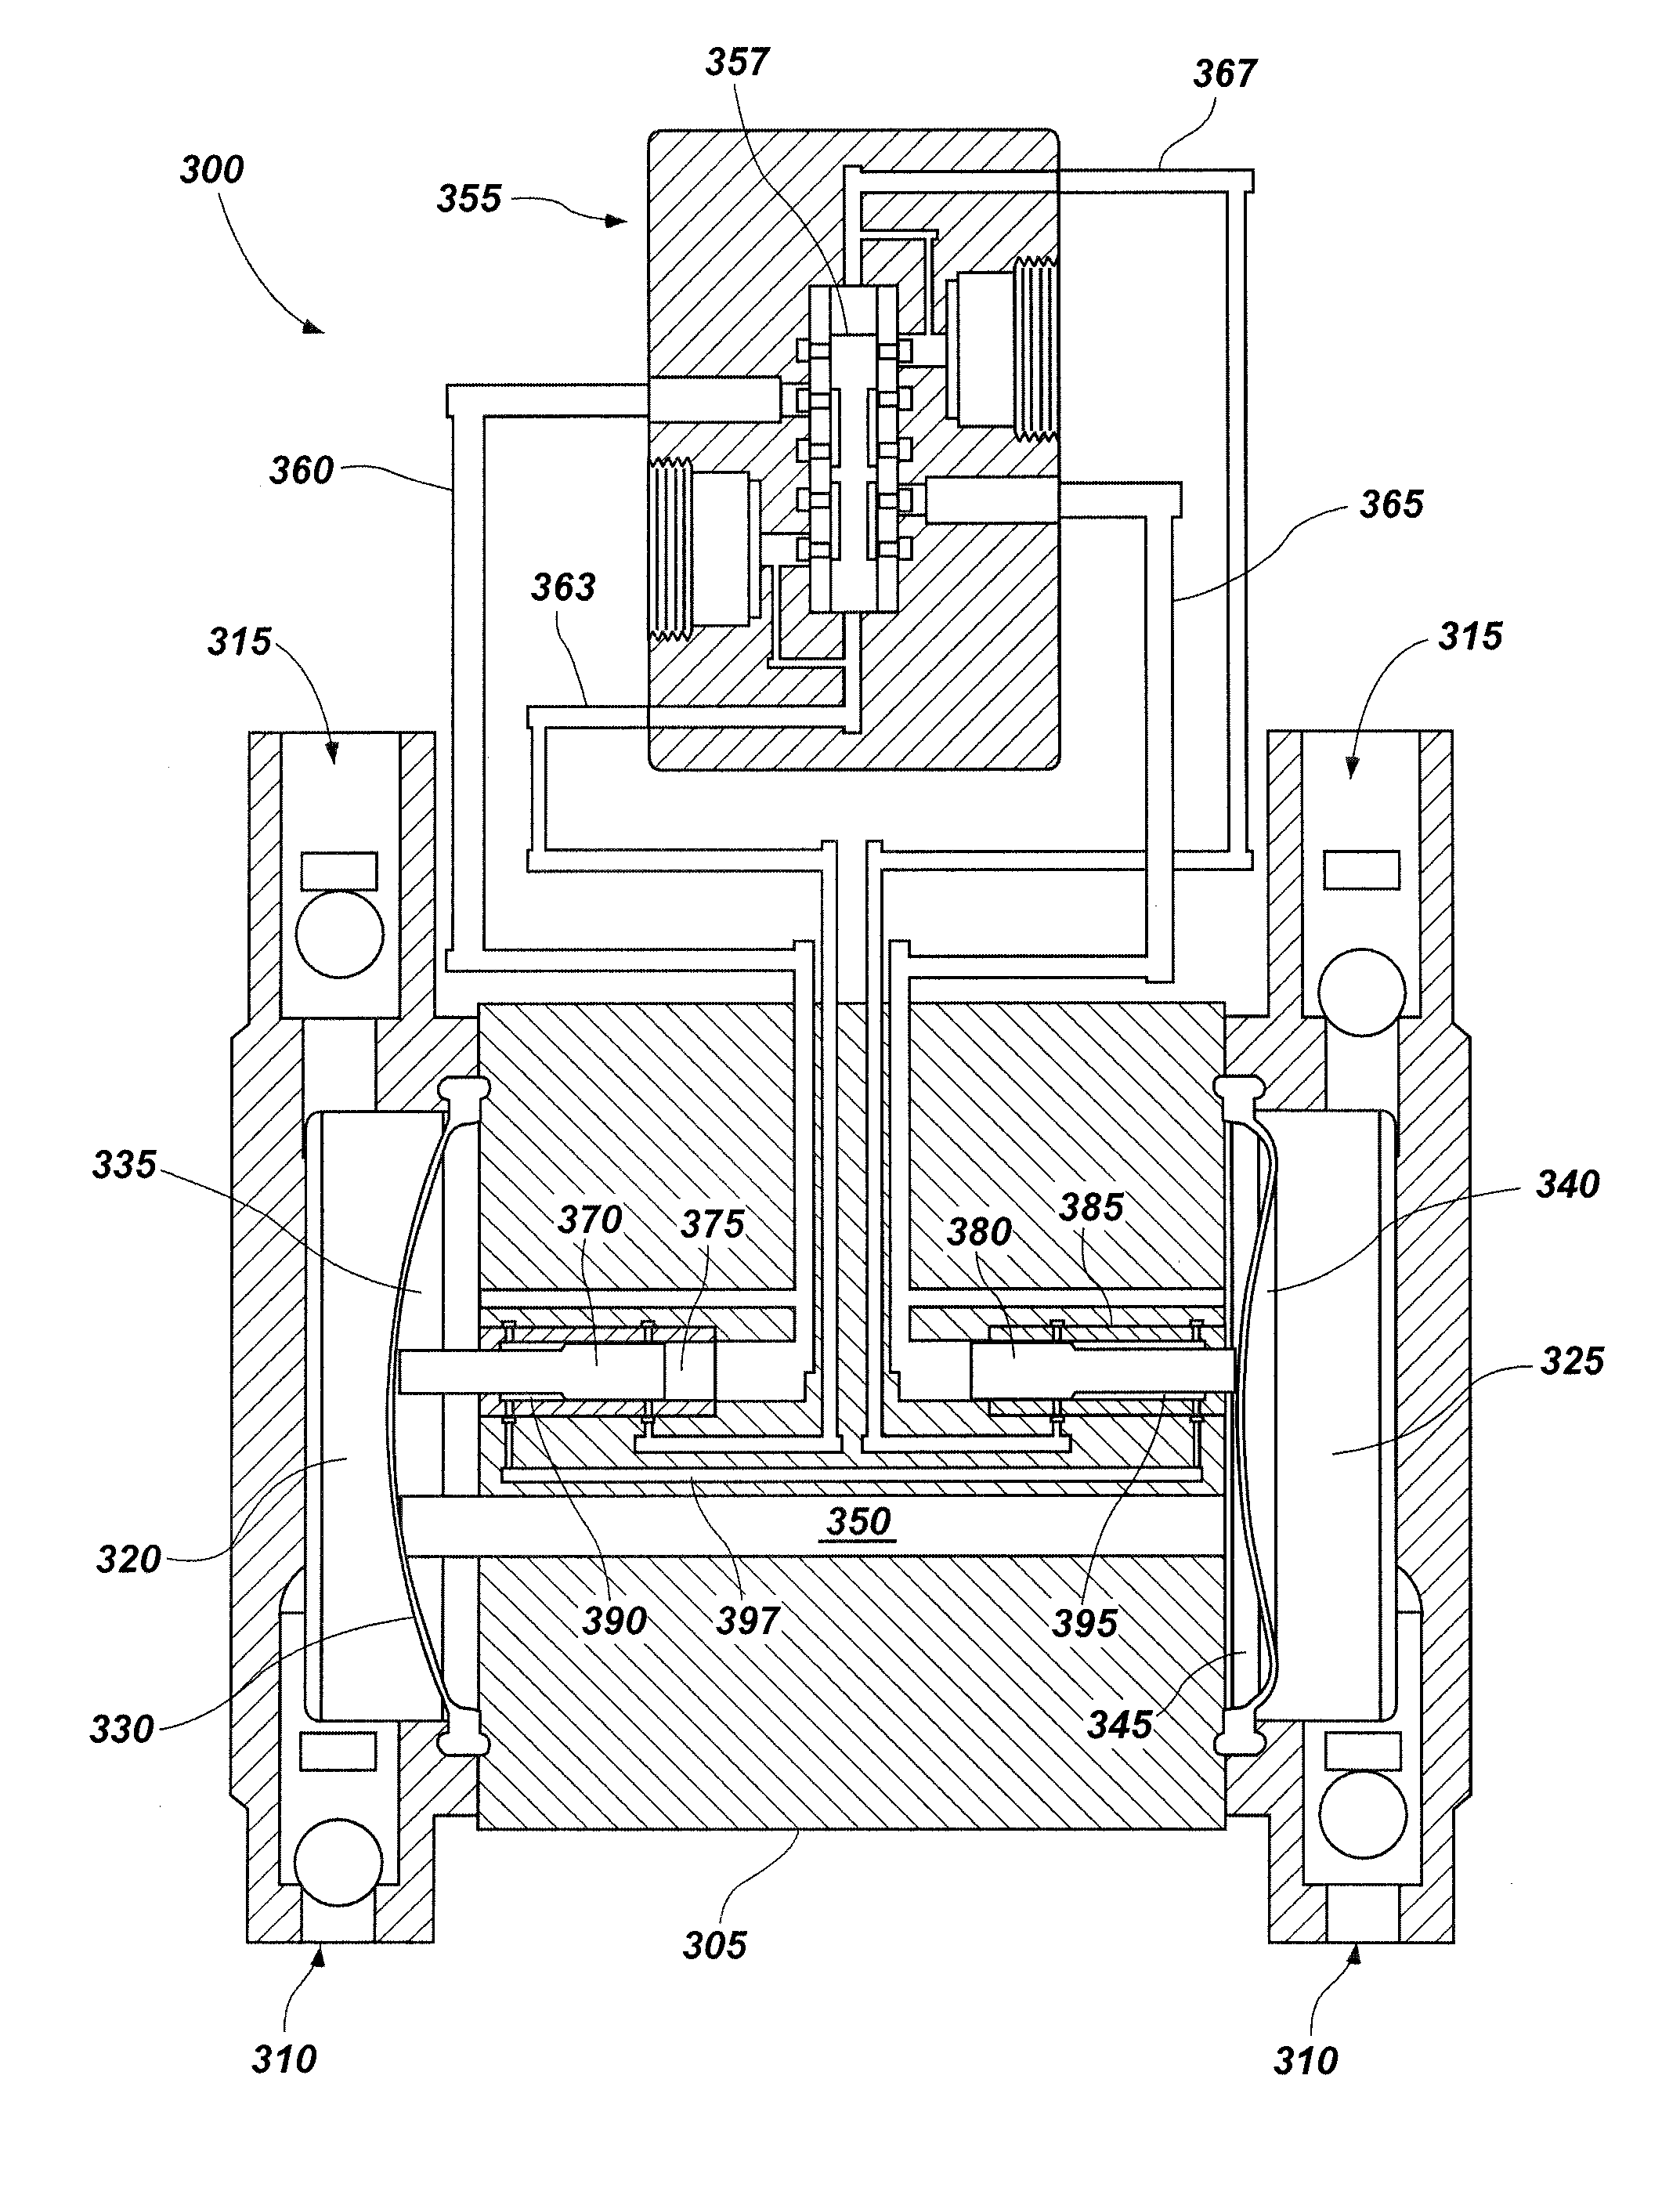 Piston systems having a flow path between piston chambers, pumps including a flow path between piston chambers, and methods of driving pumps